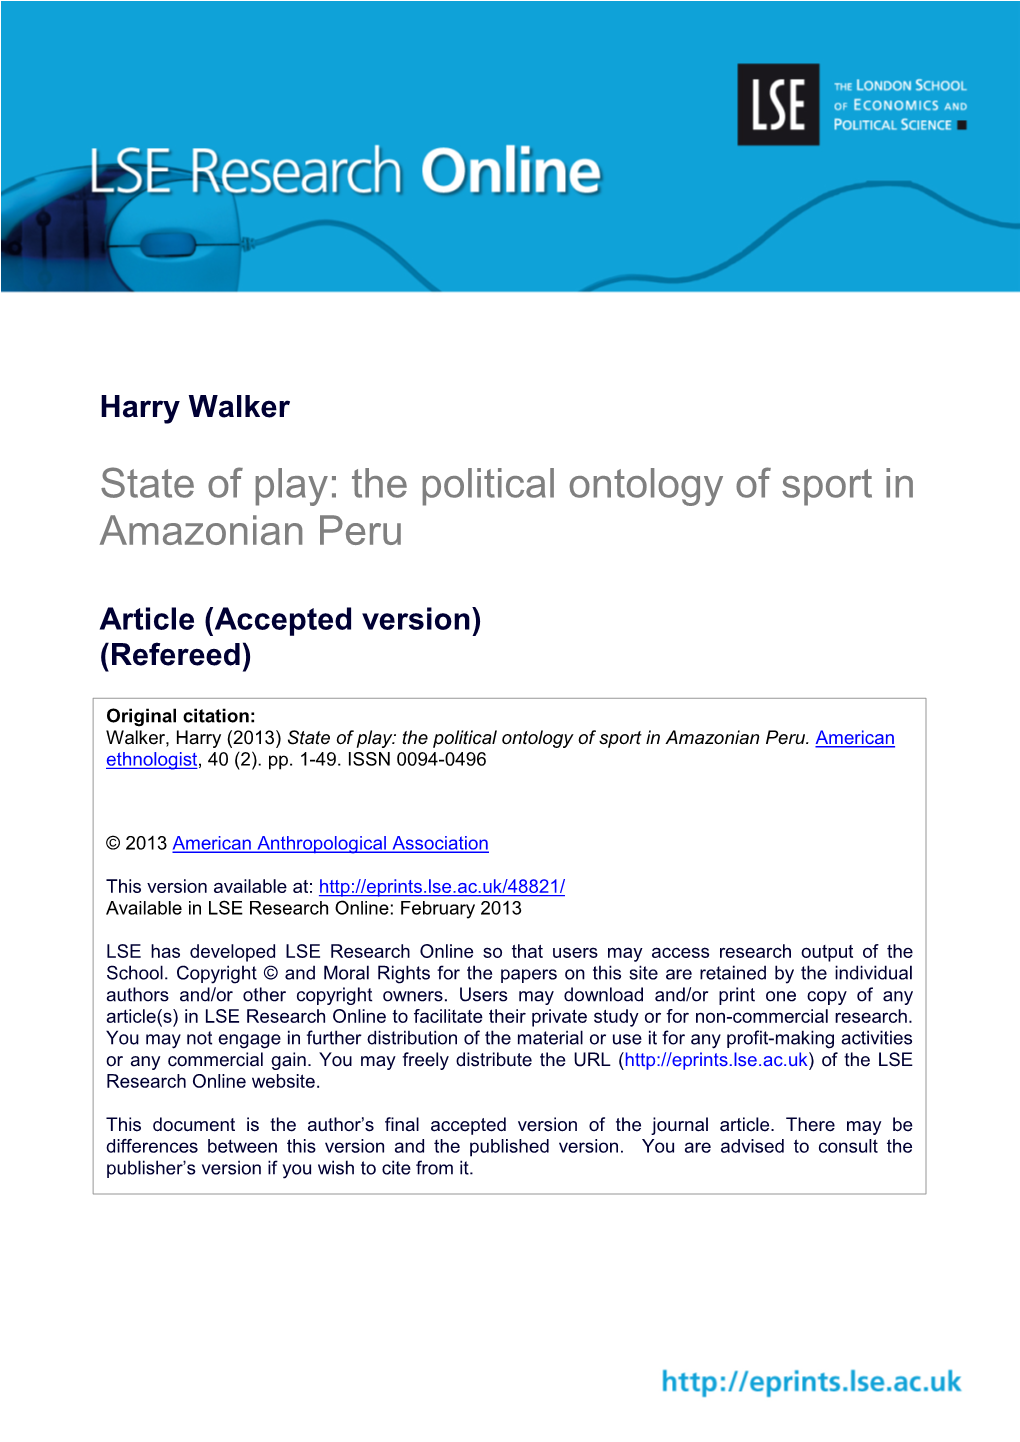 State of Play: the Political Ontology of Sport in Amazonian Peru